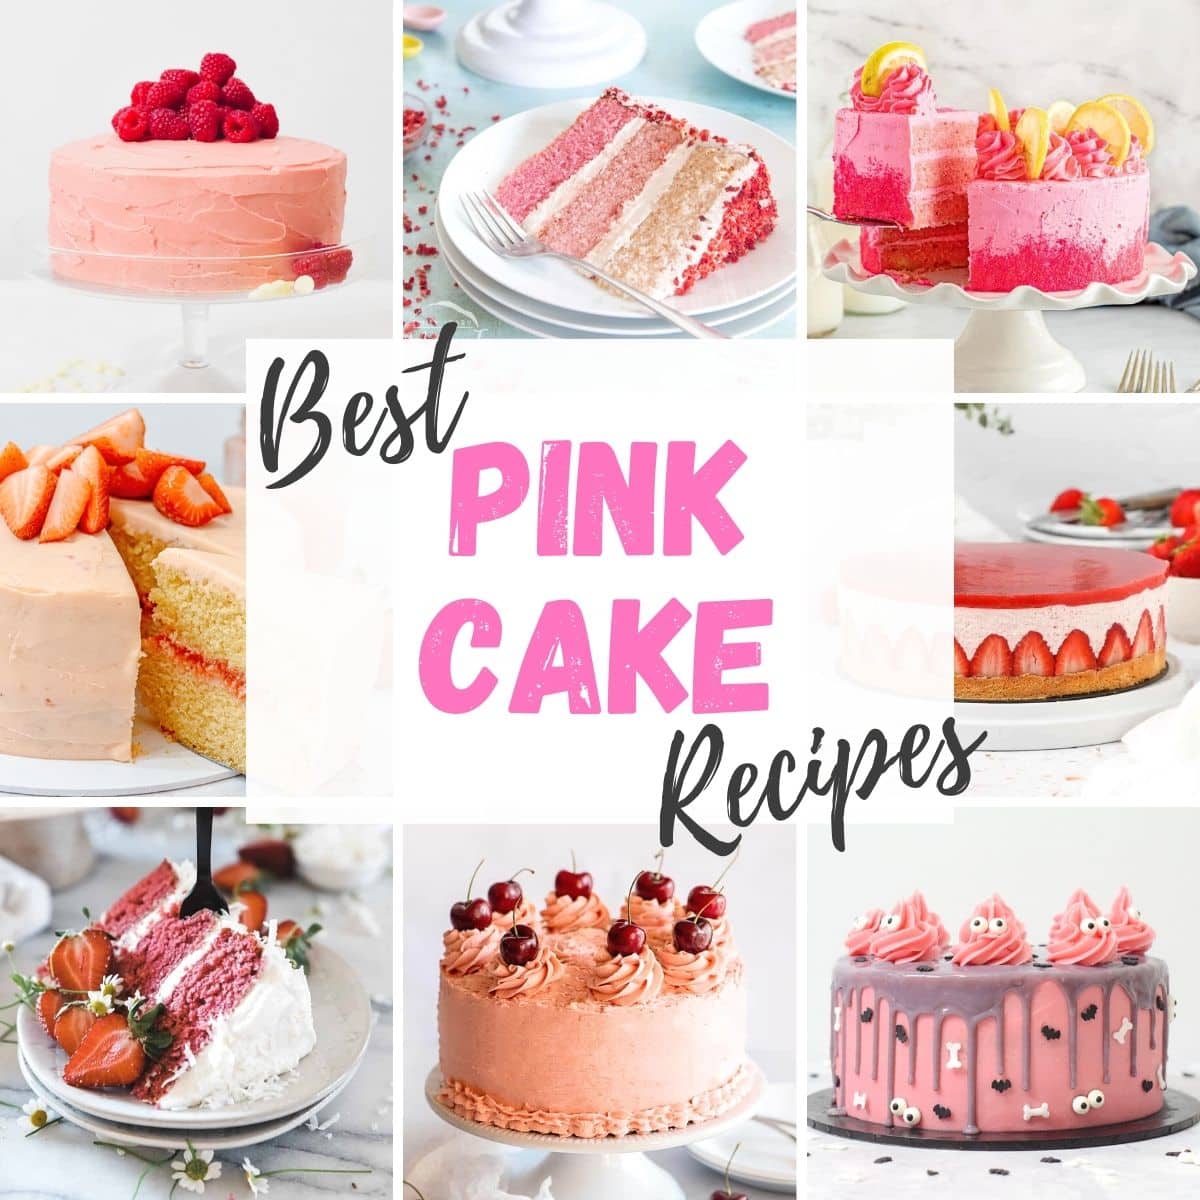 best pink cake recipes ideas in a grid including strawberry cake, raspberry cake, cherry cake, pink drip cake.